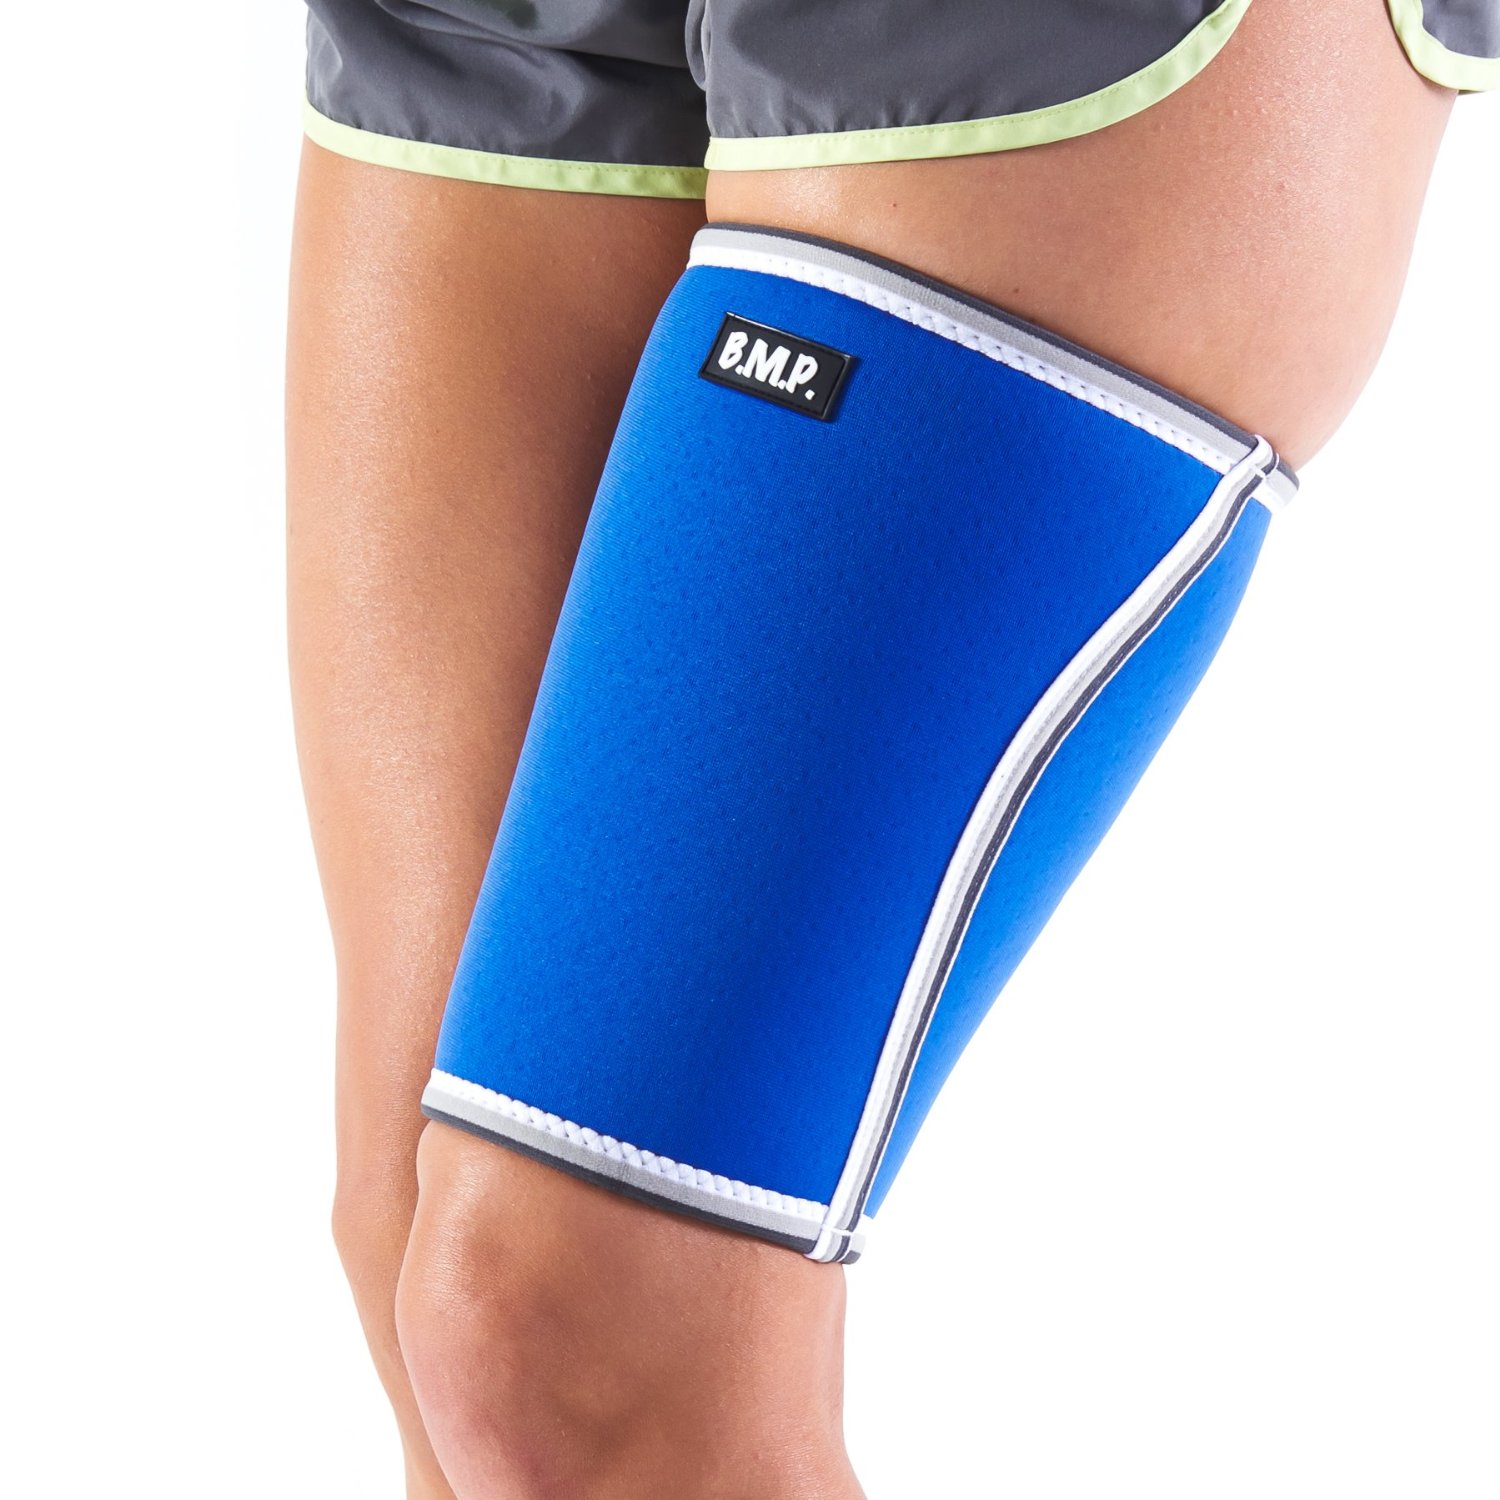 Thigh Brace / Compression Sleeve - Therapeutic Warming Sensation